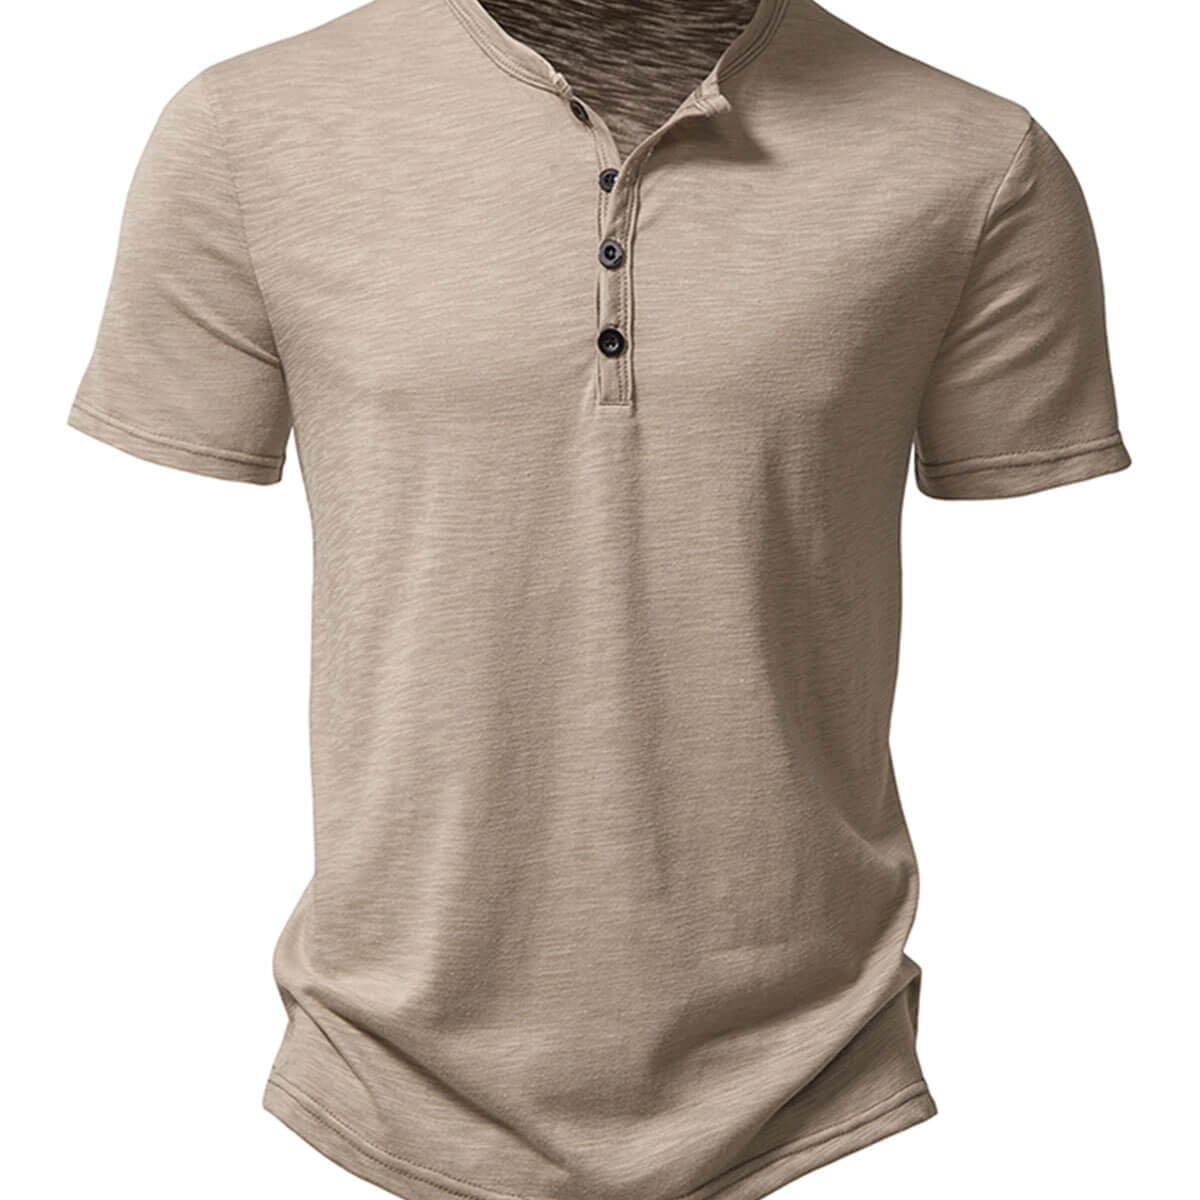 Men's Summer Solid Color Casual Short Sleeve T-Shirt